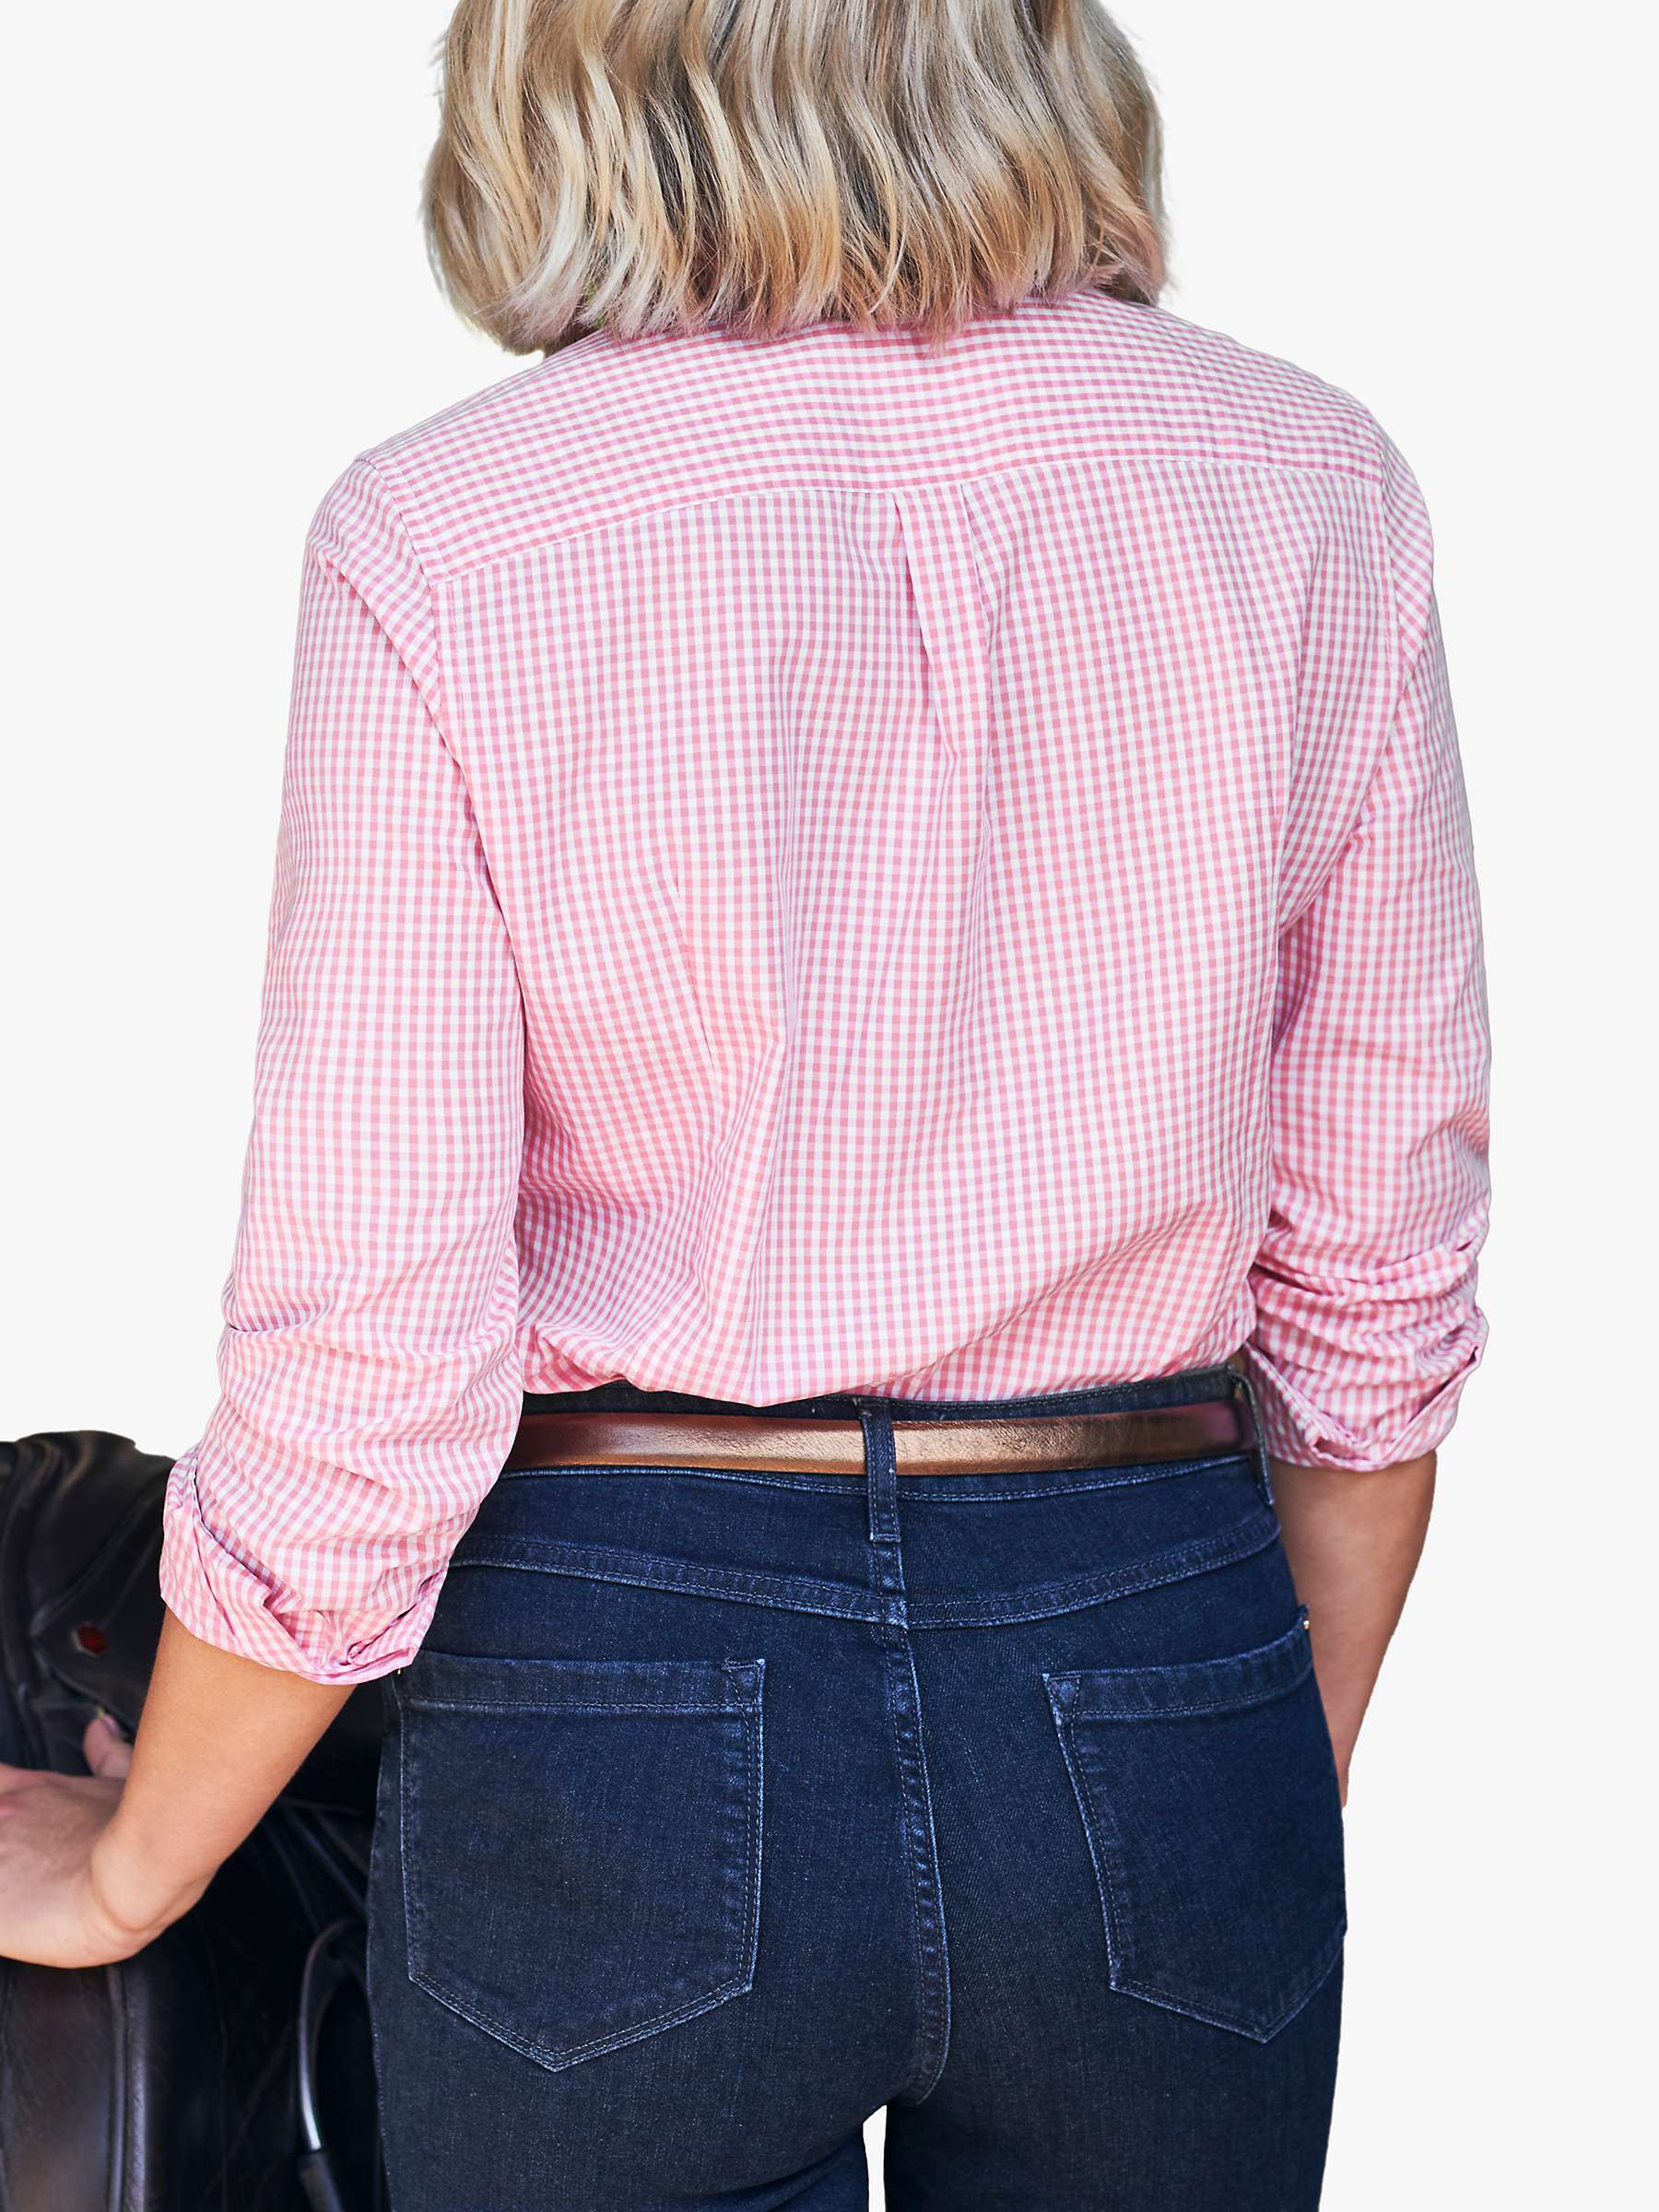 Buy Pure Collection Gingham Cotton Shirt, Pink/White Online at johnlewis.com